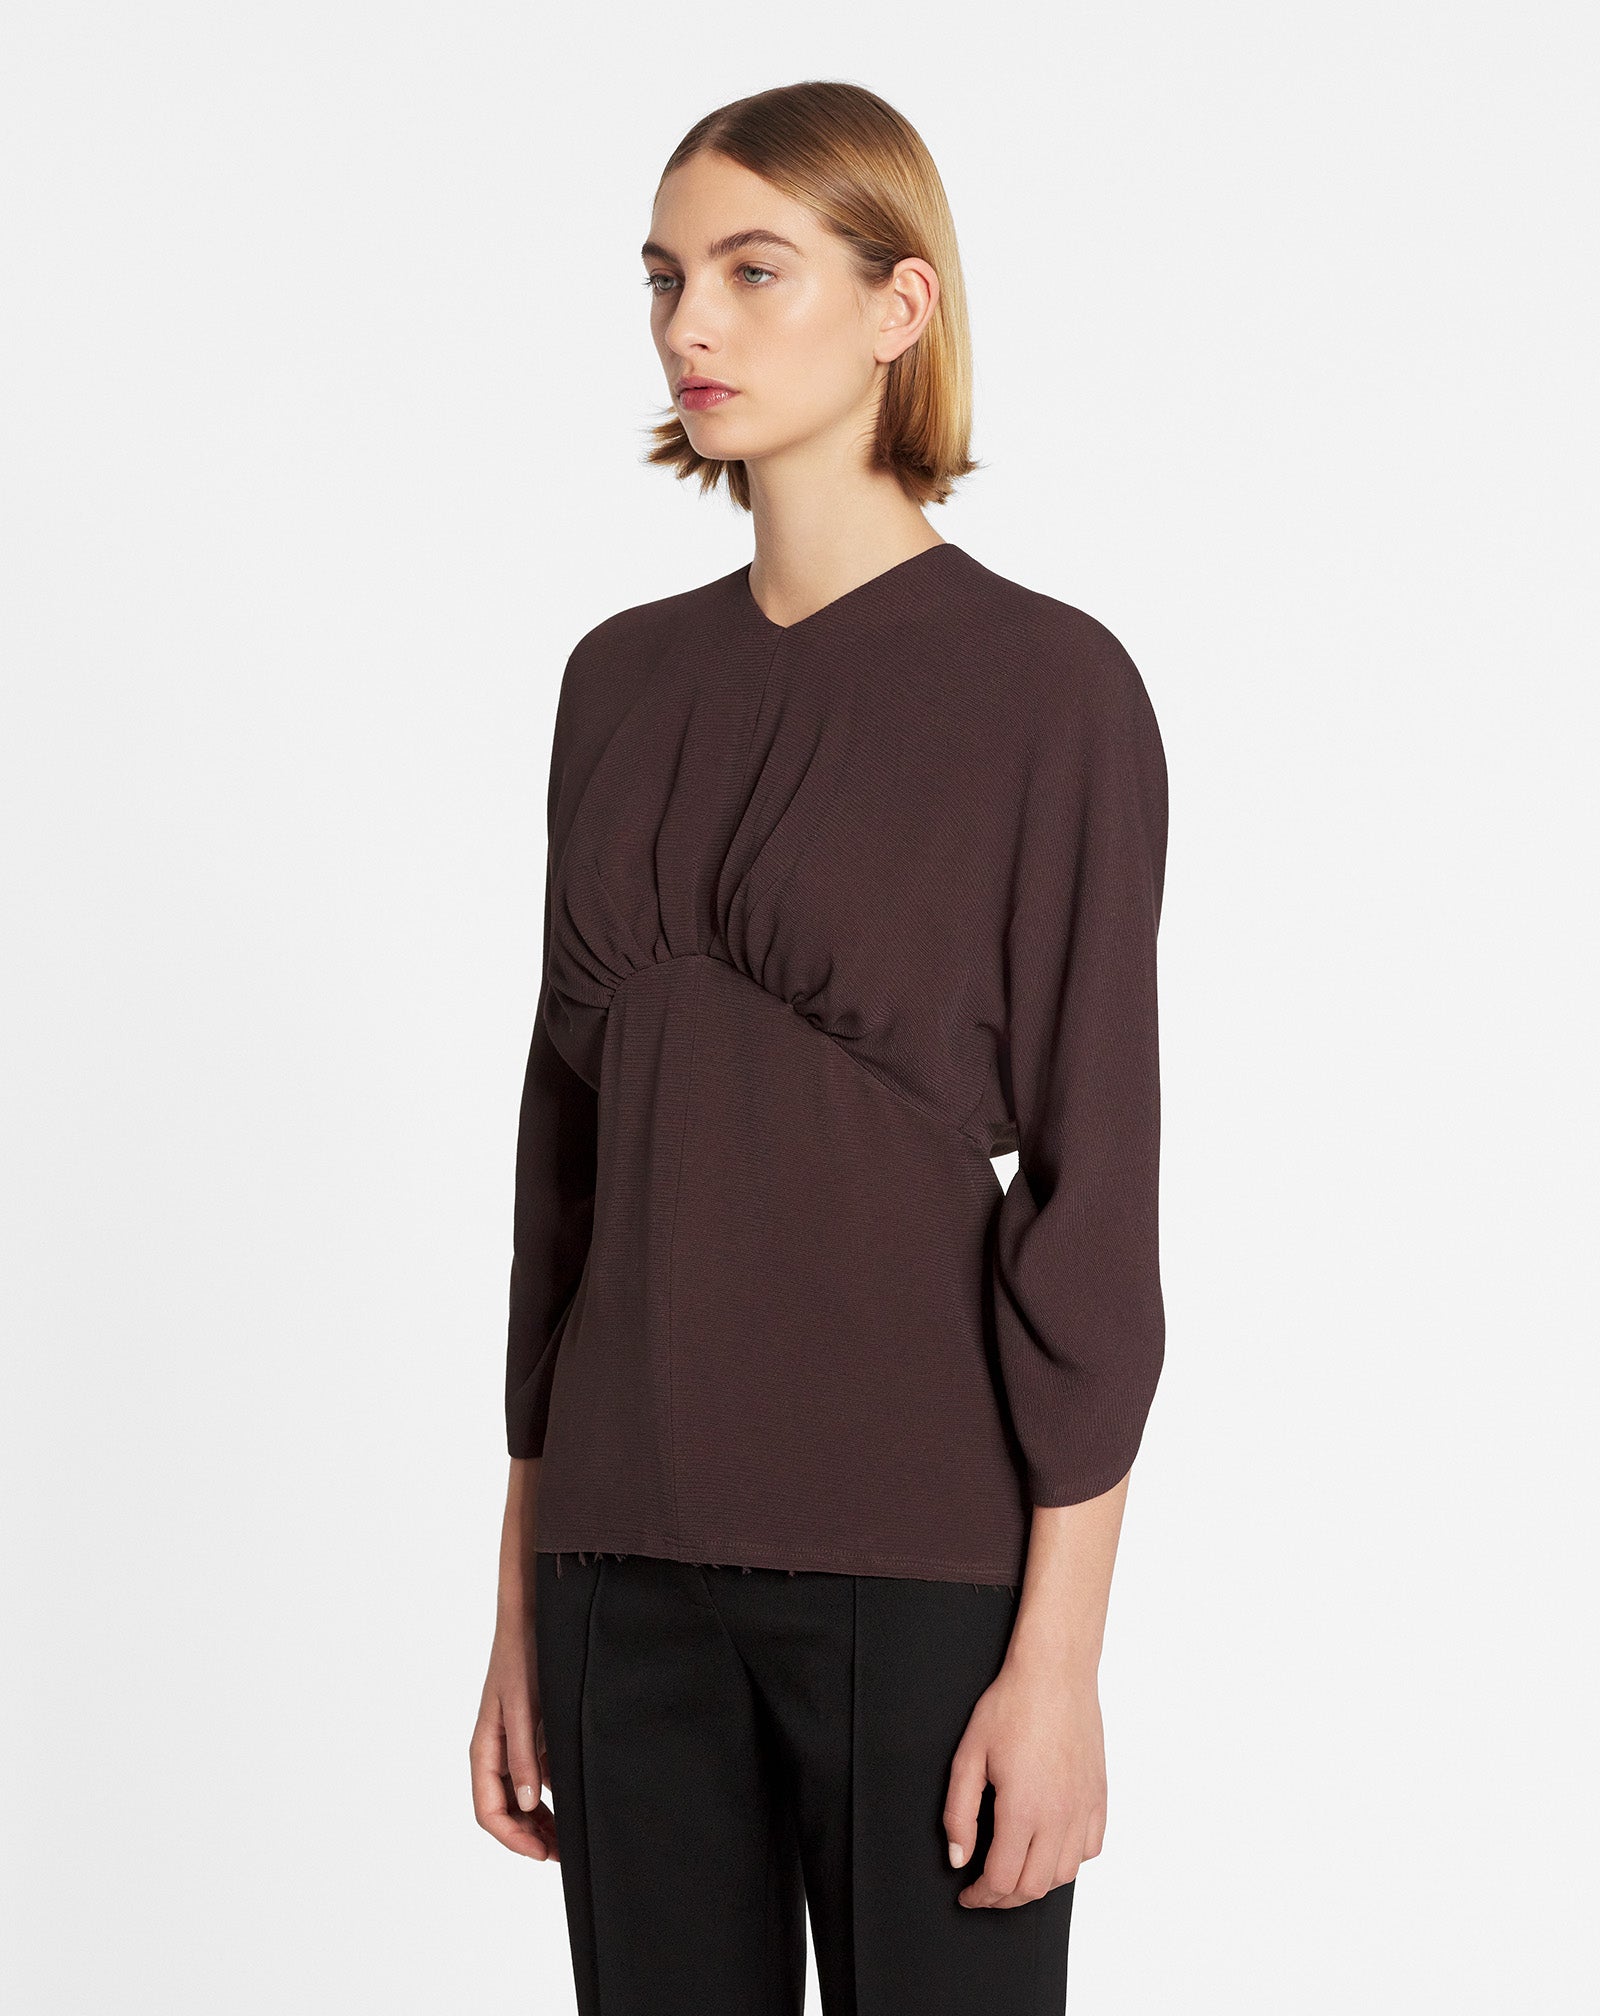 GATHERED TOP WITH 3/4-LENGTH SLEEVES, COCOA